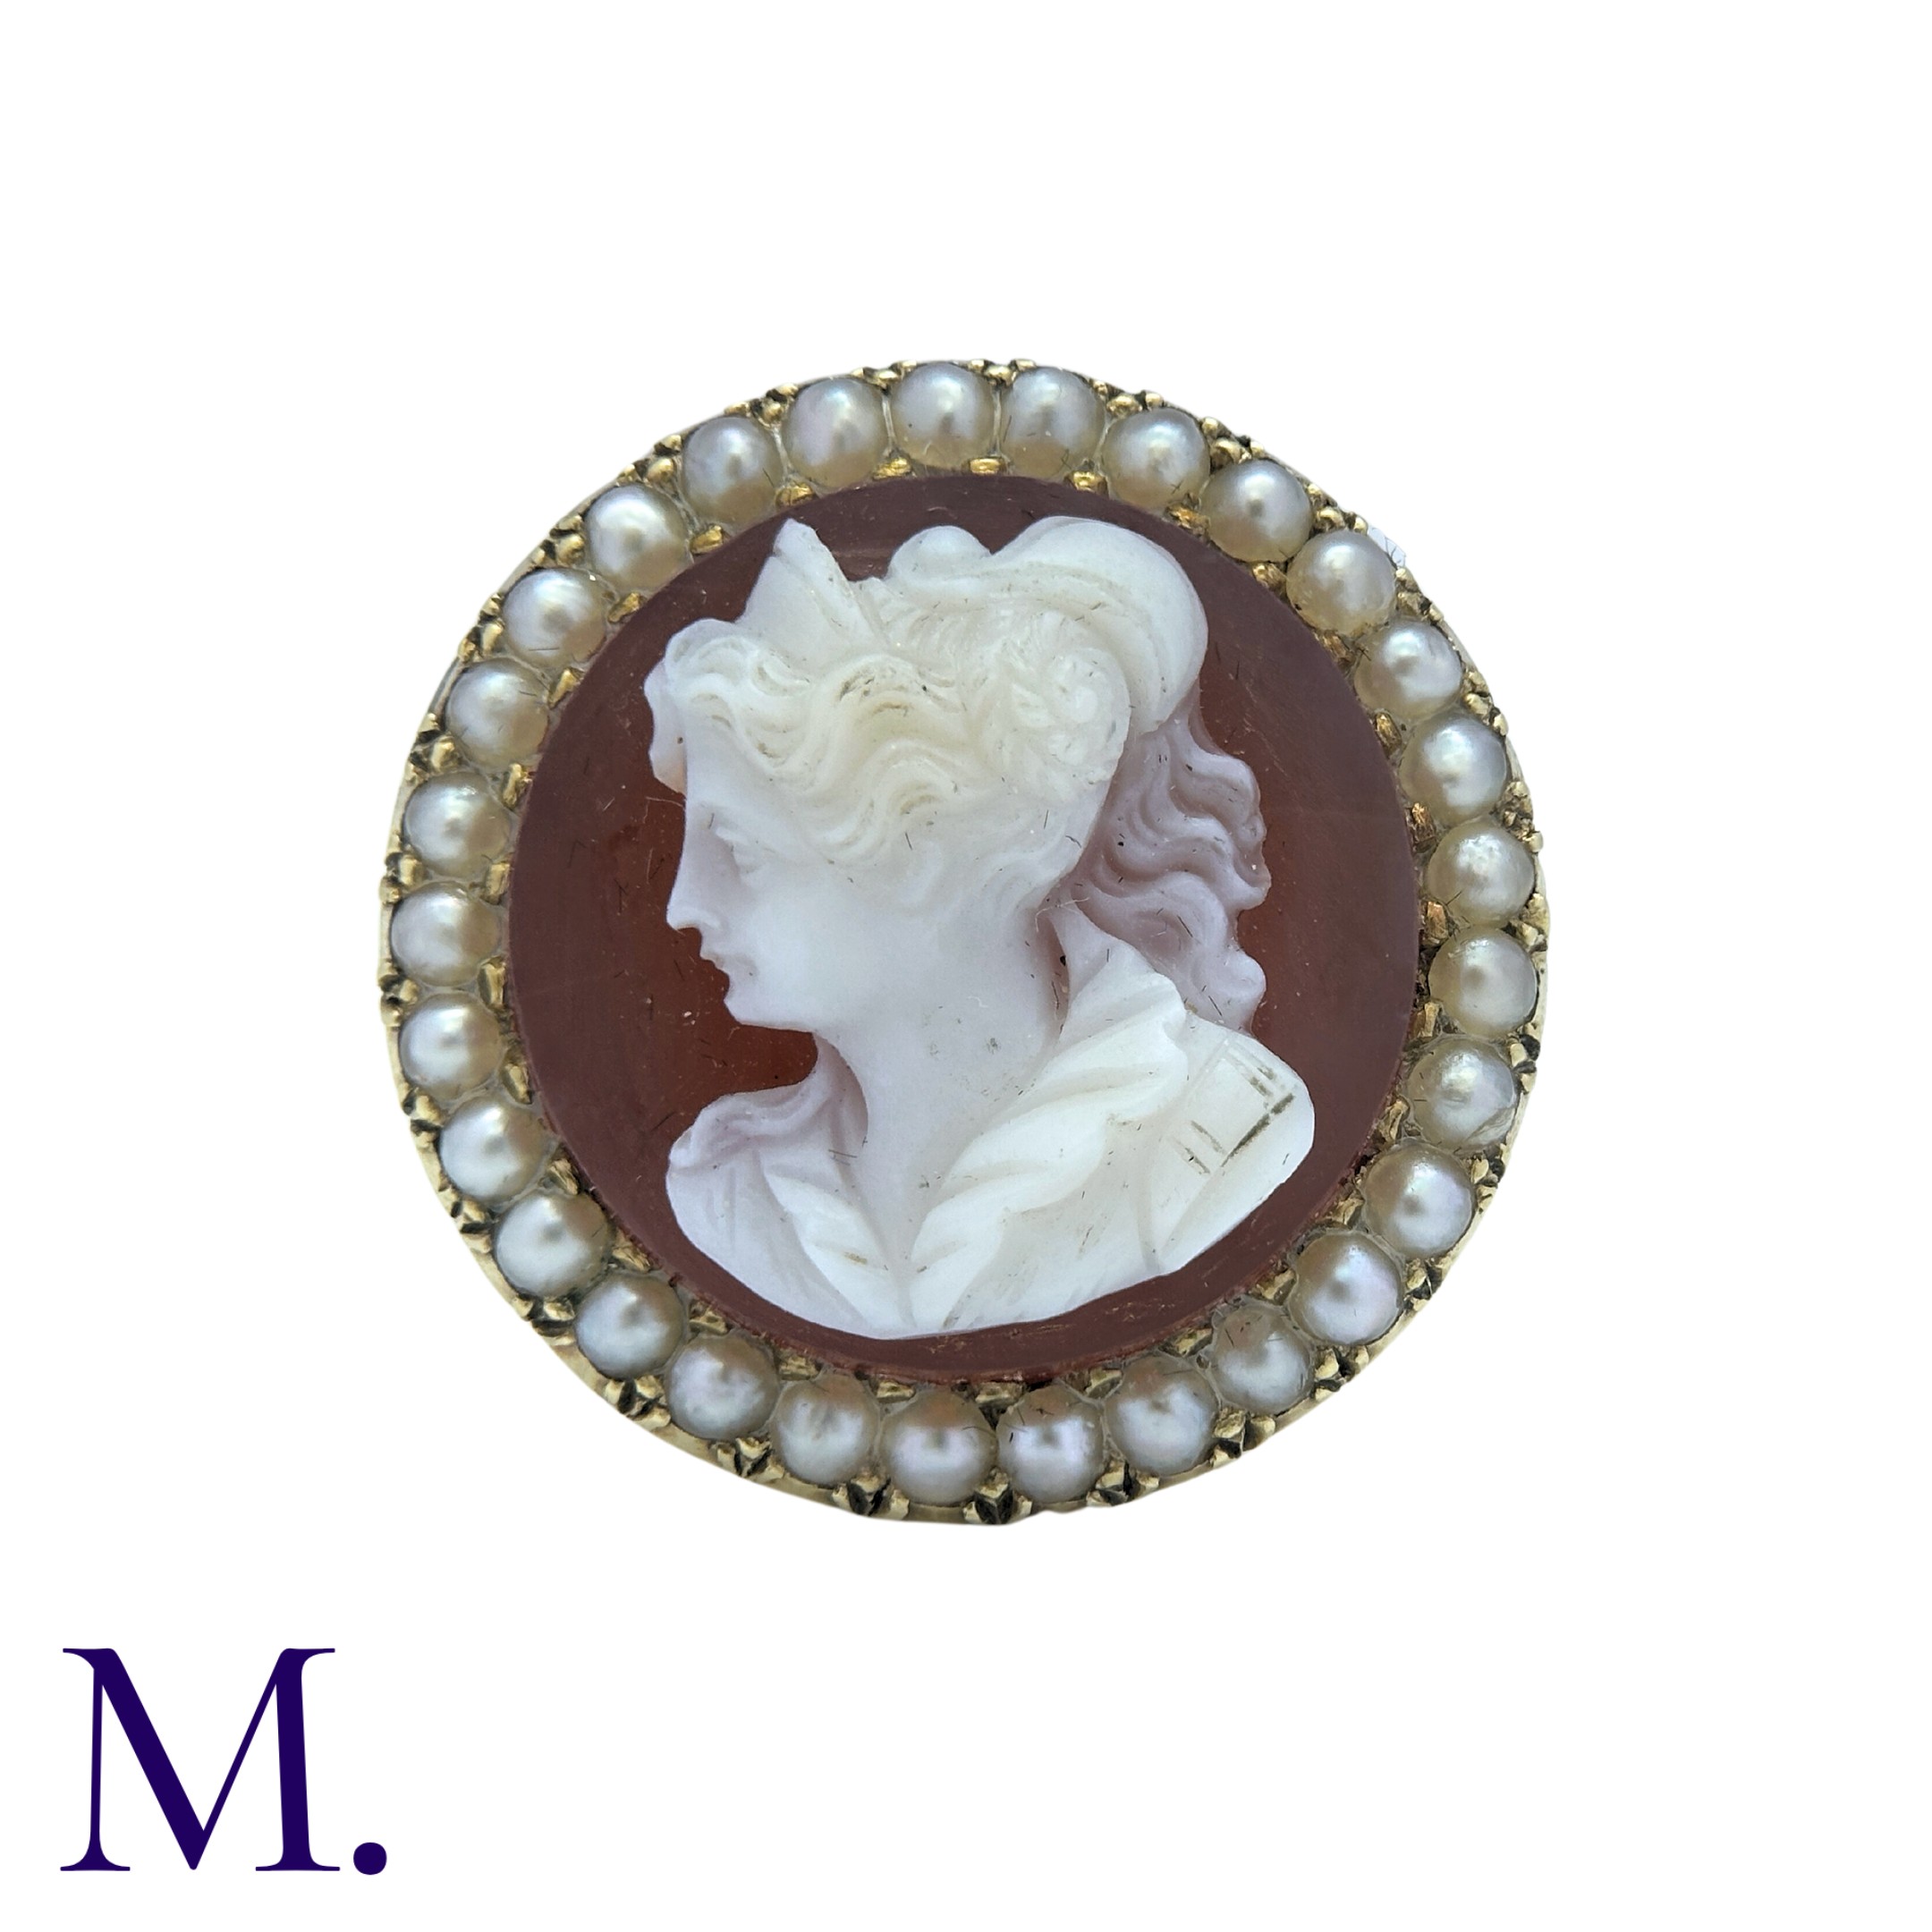 A Hardstone Cameo Ring in 18K yellow gold set with a hardstone cameo depicting a female bust, with